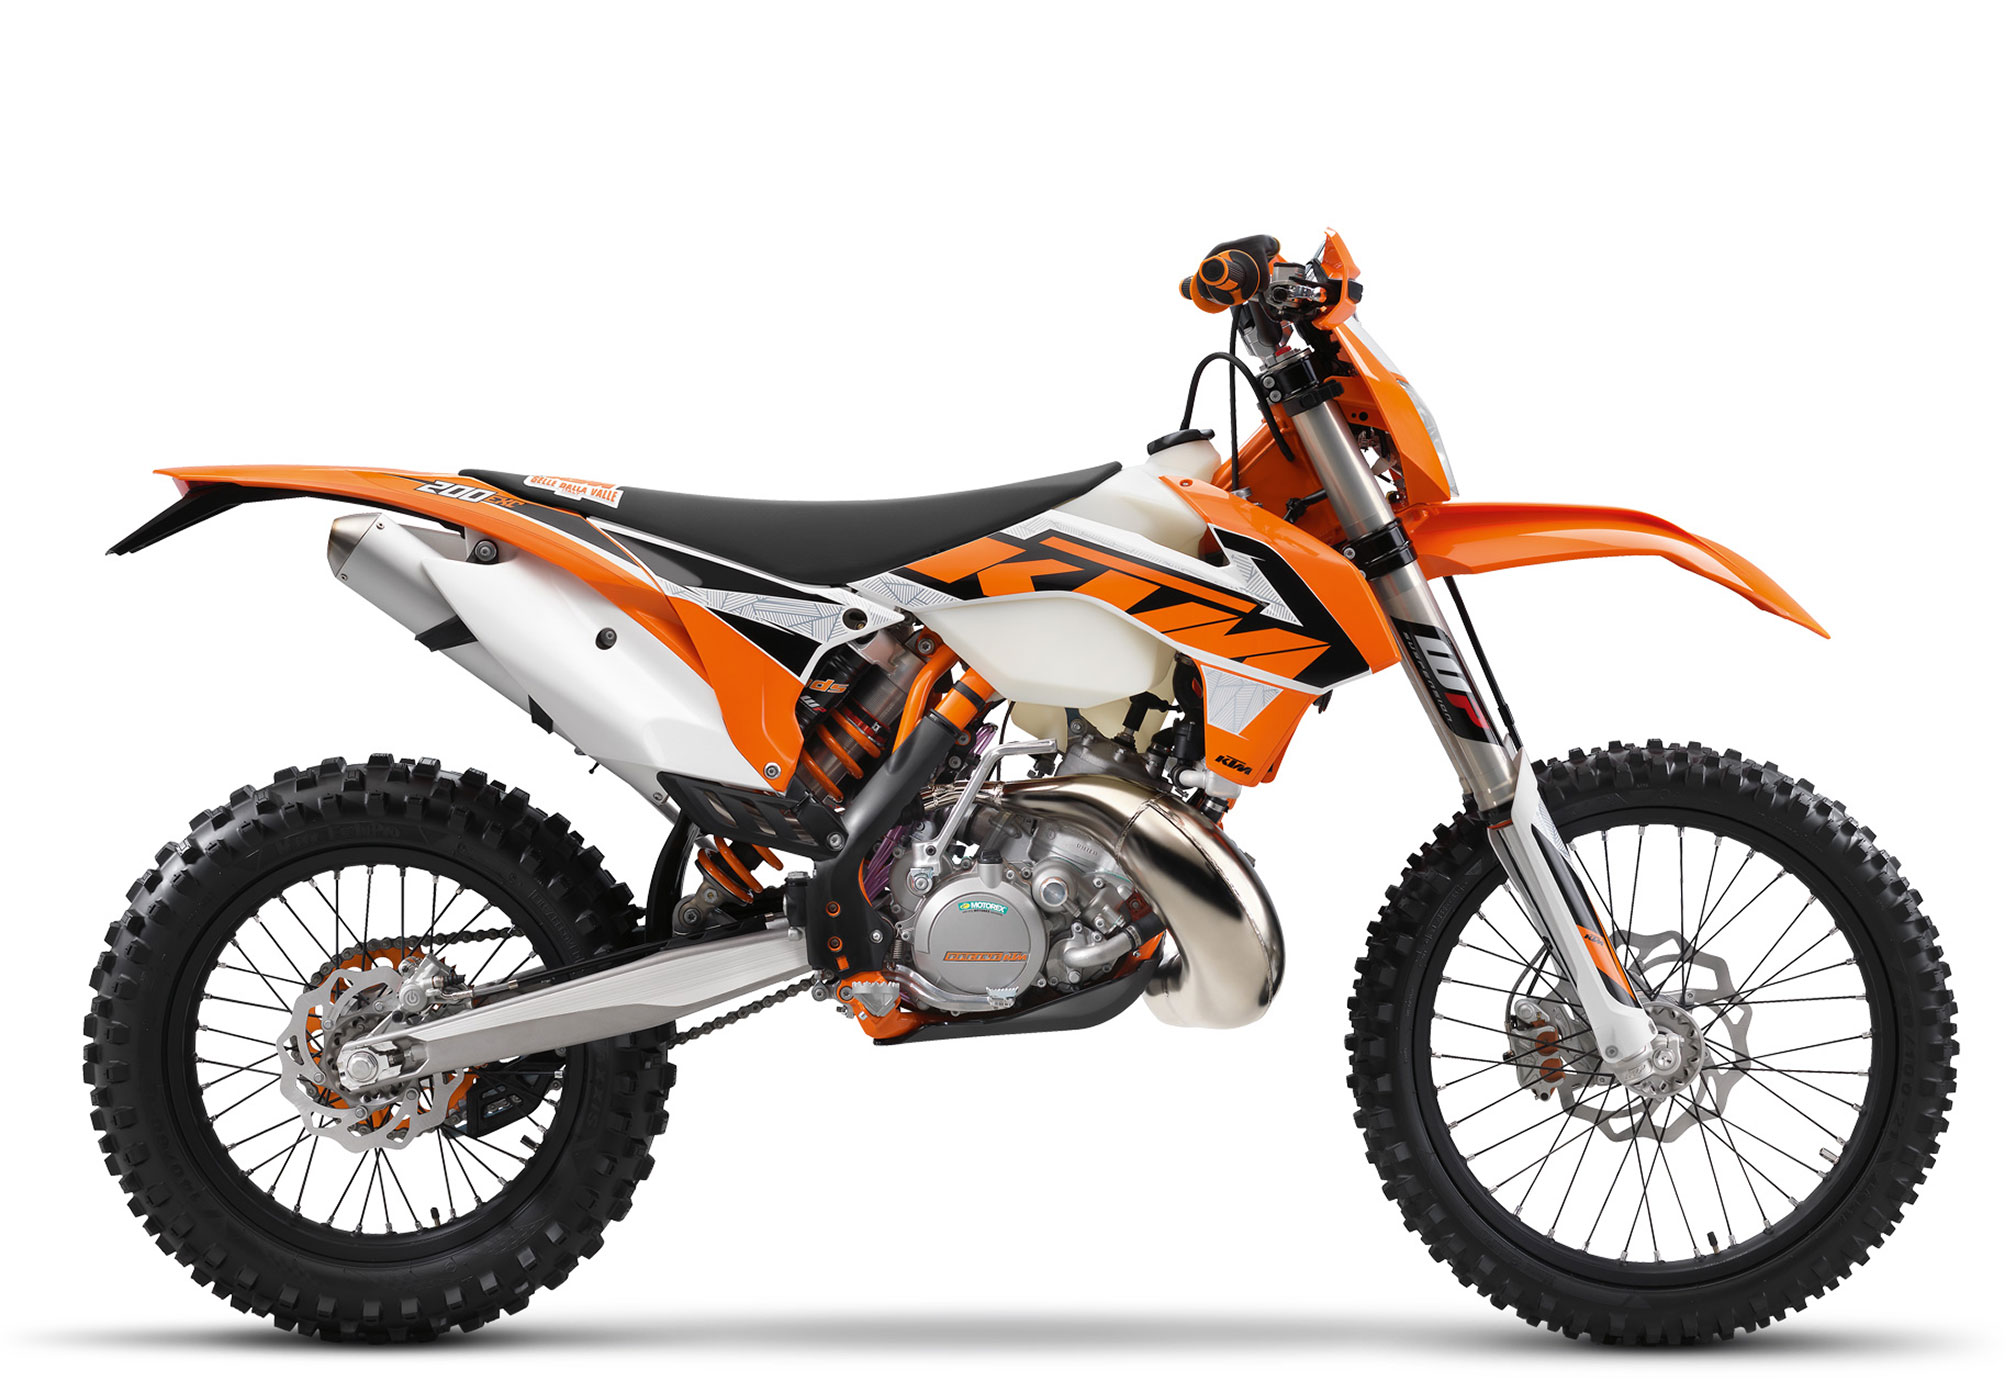 2016 KTM 200 EXC Review